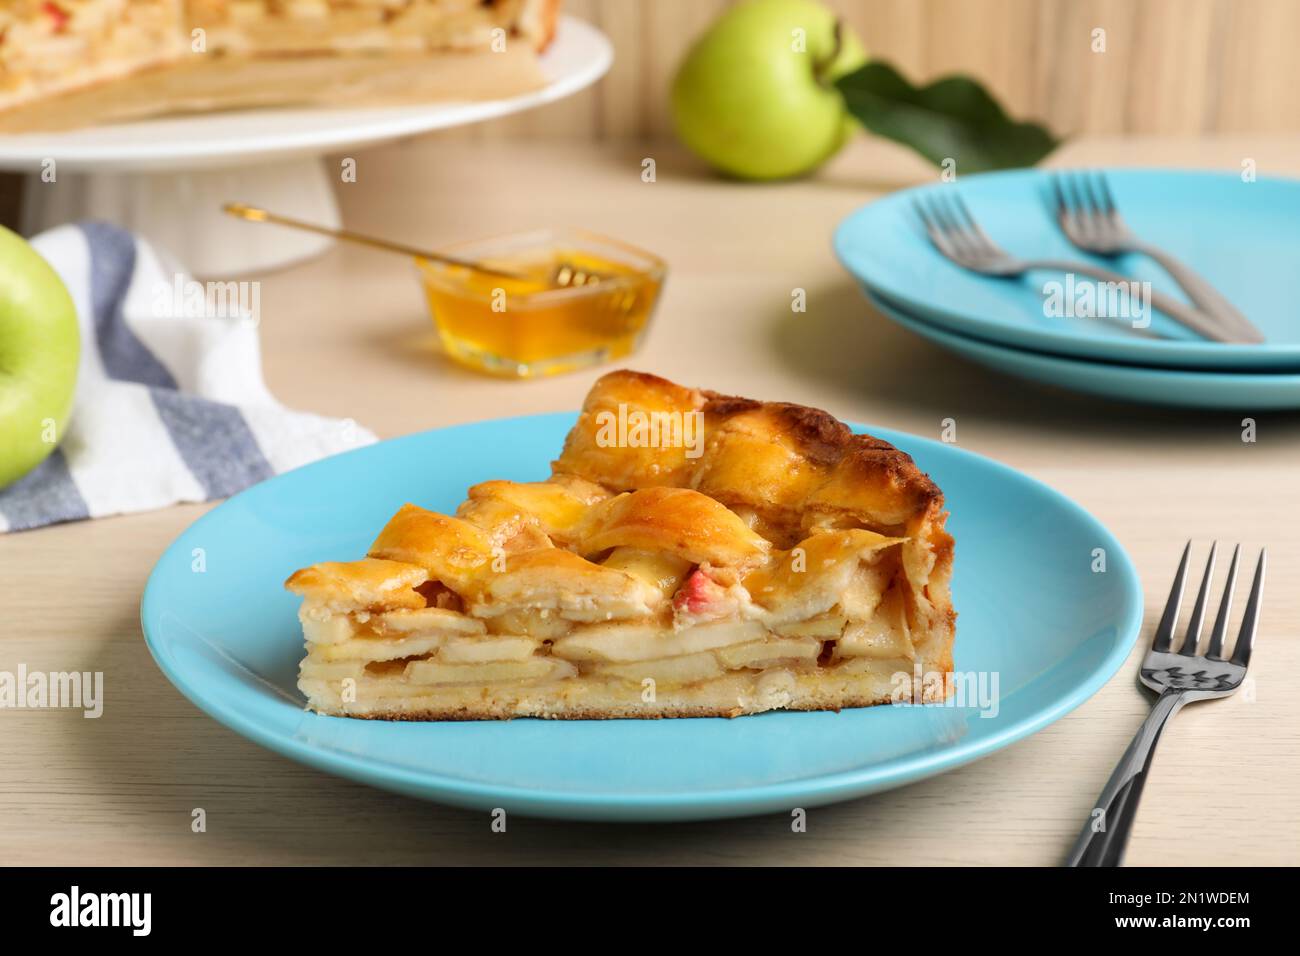 Slice of traditional apple pie on wooden table Stock Photo